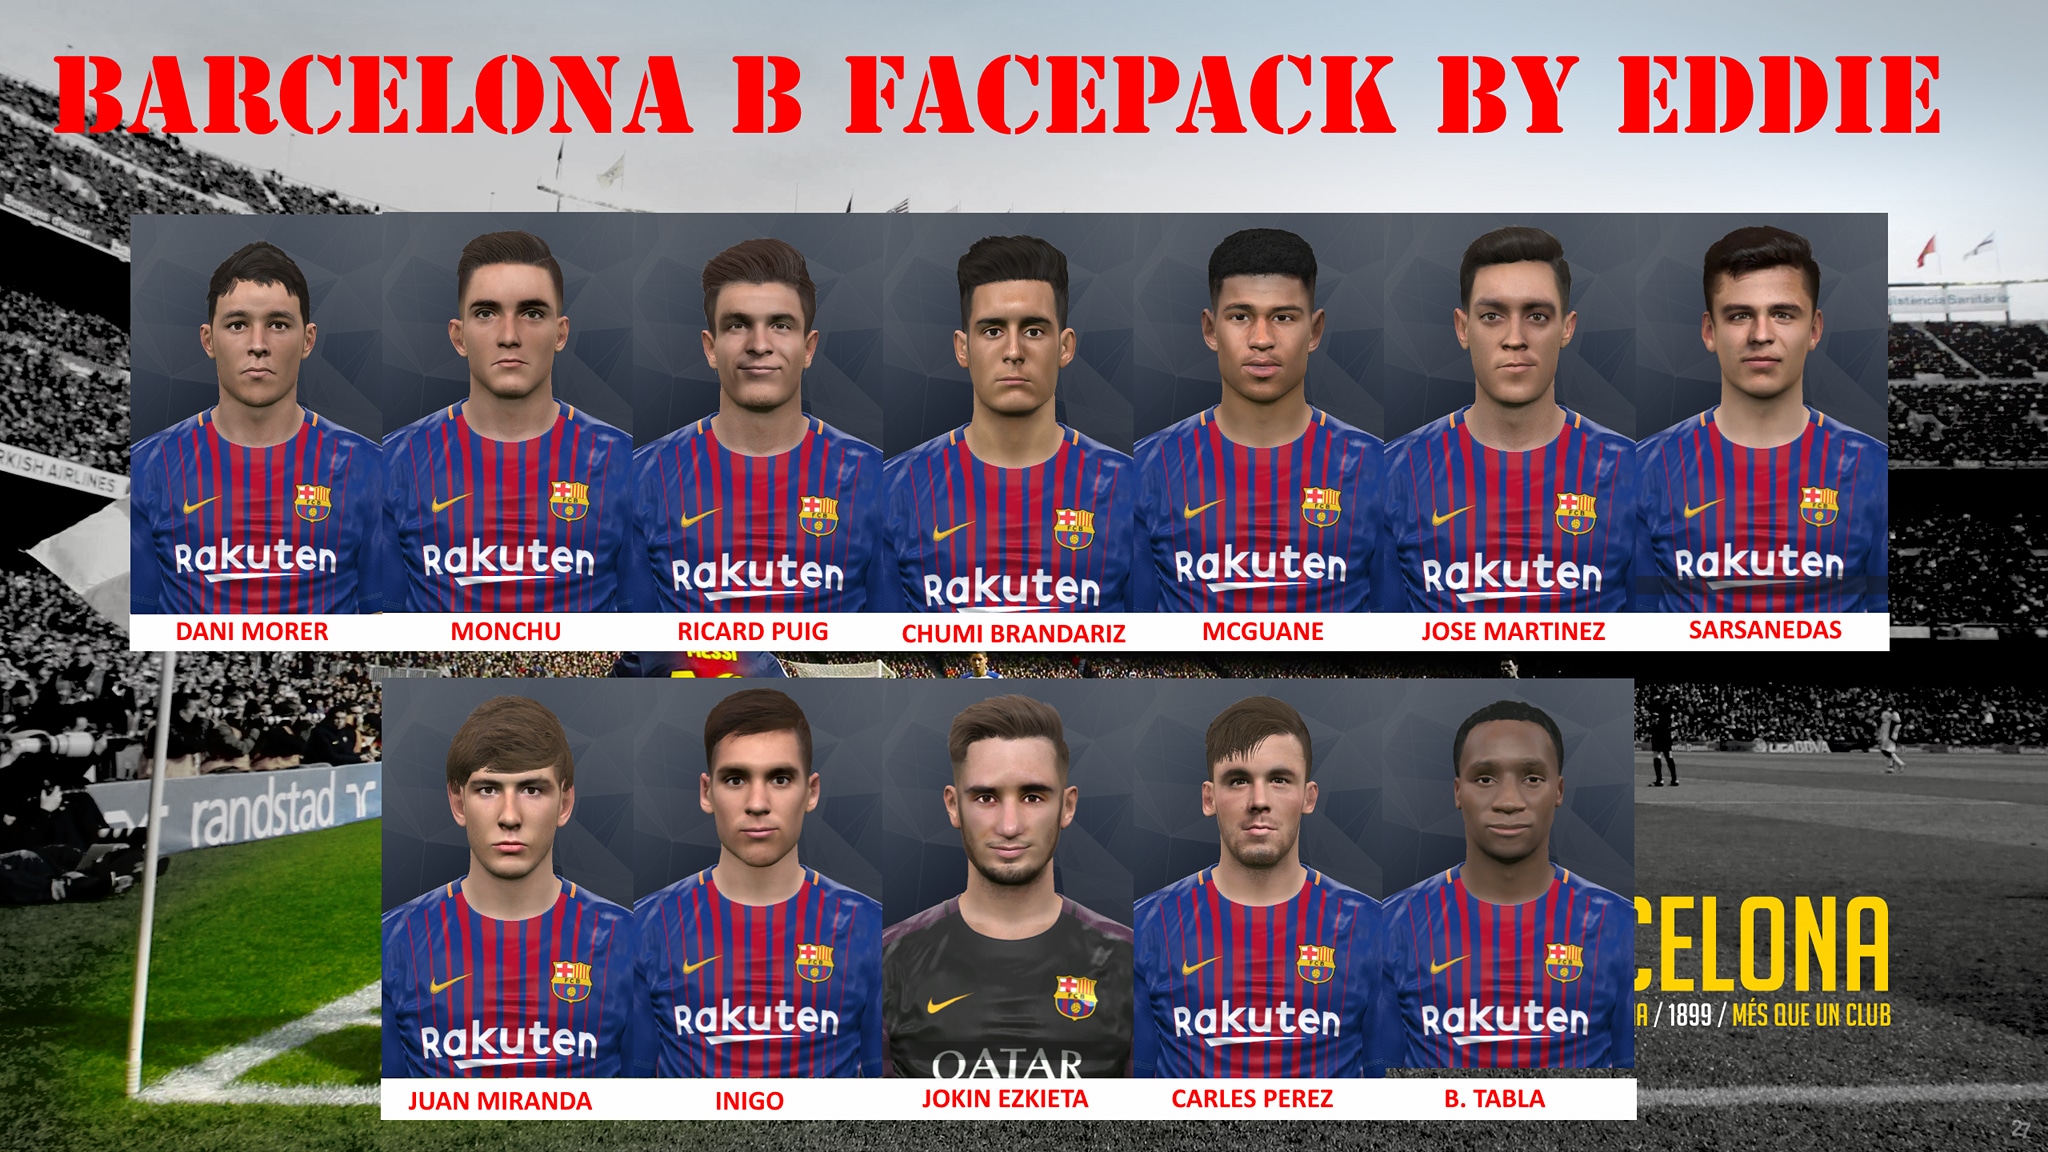 Download Pes2017 Fc Barcelona B Faces Pack By Eddie - Dont Lose Your Head Zion , HD Wallpaper & Backgrounds